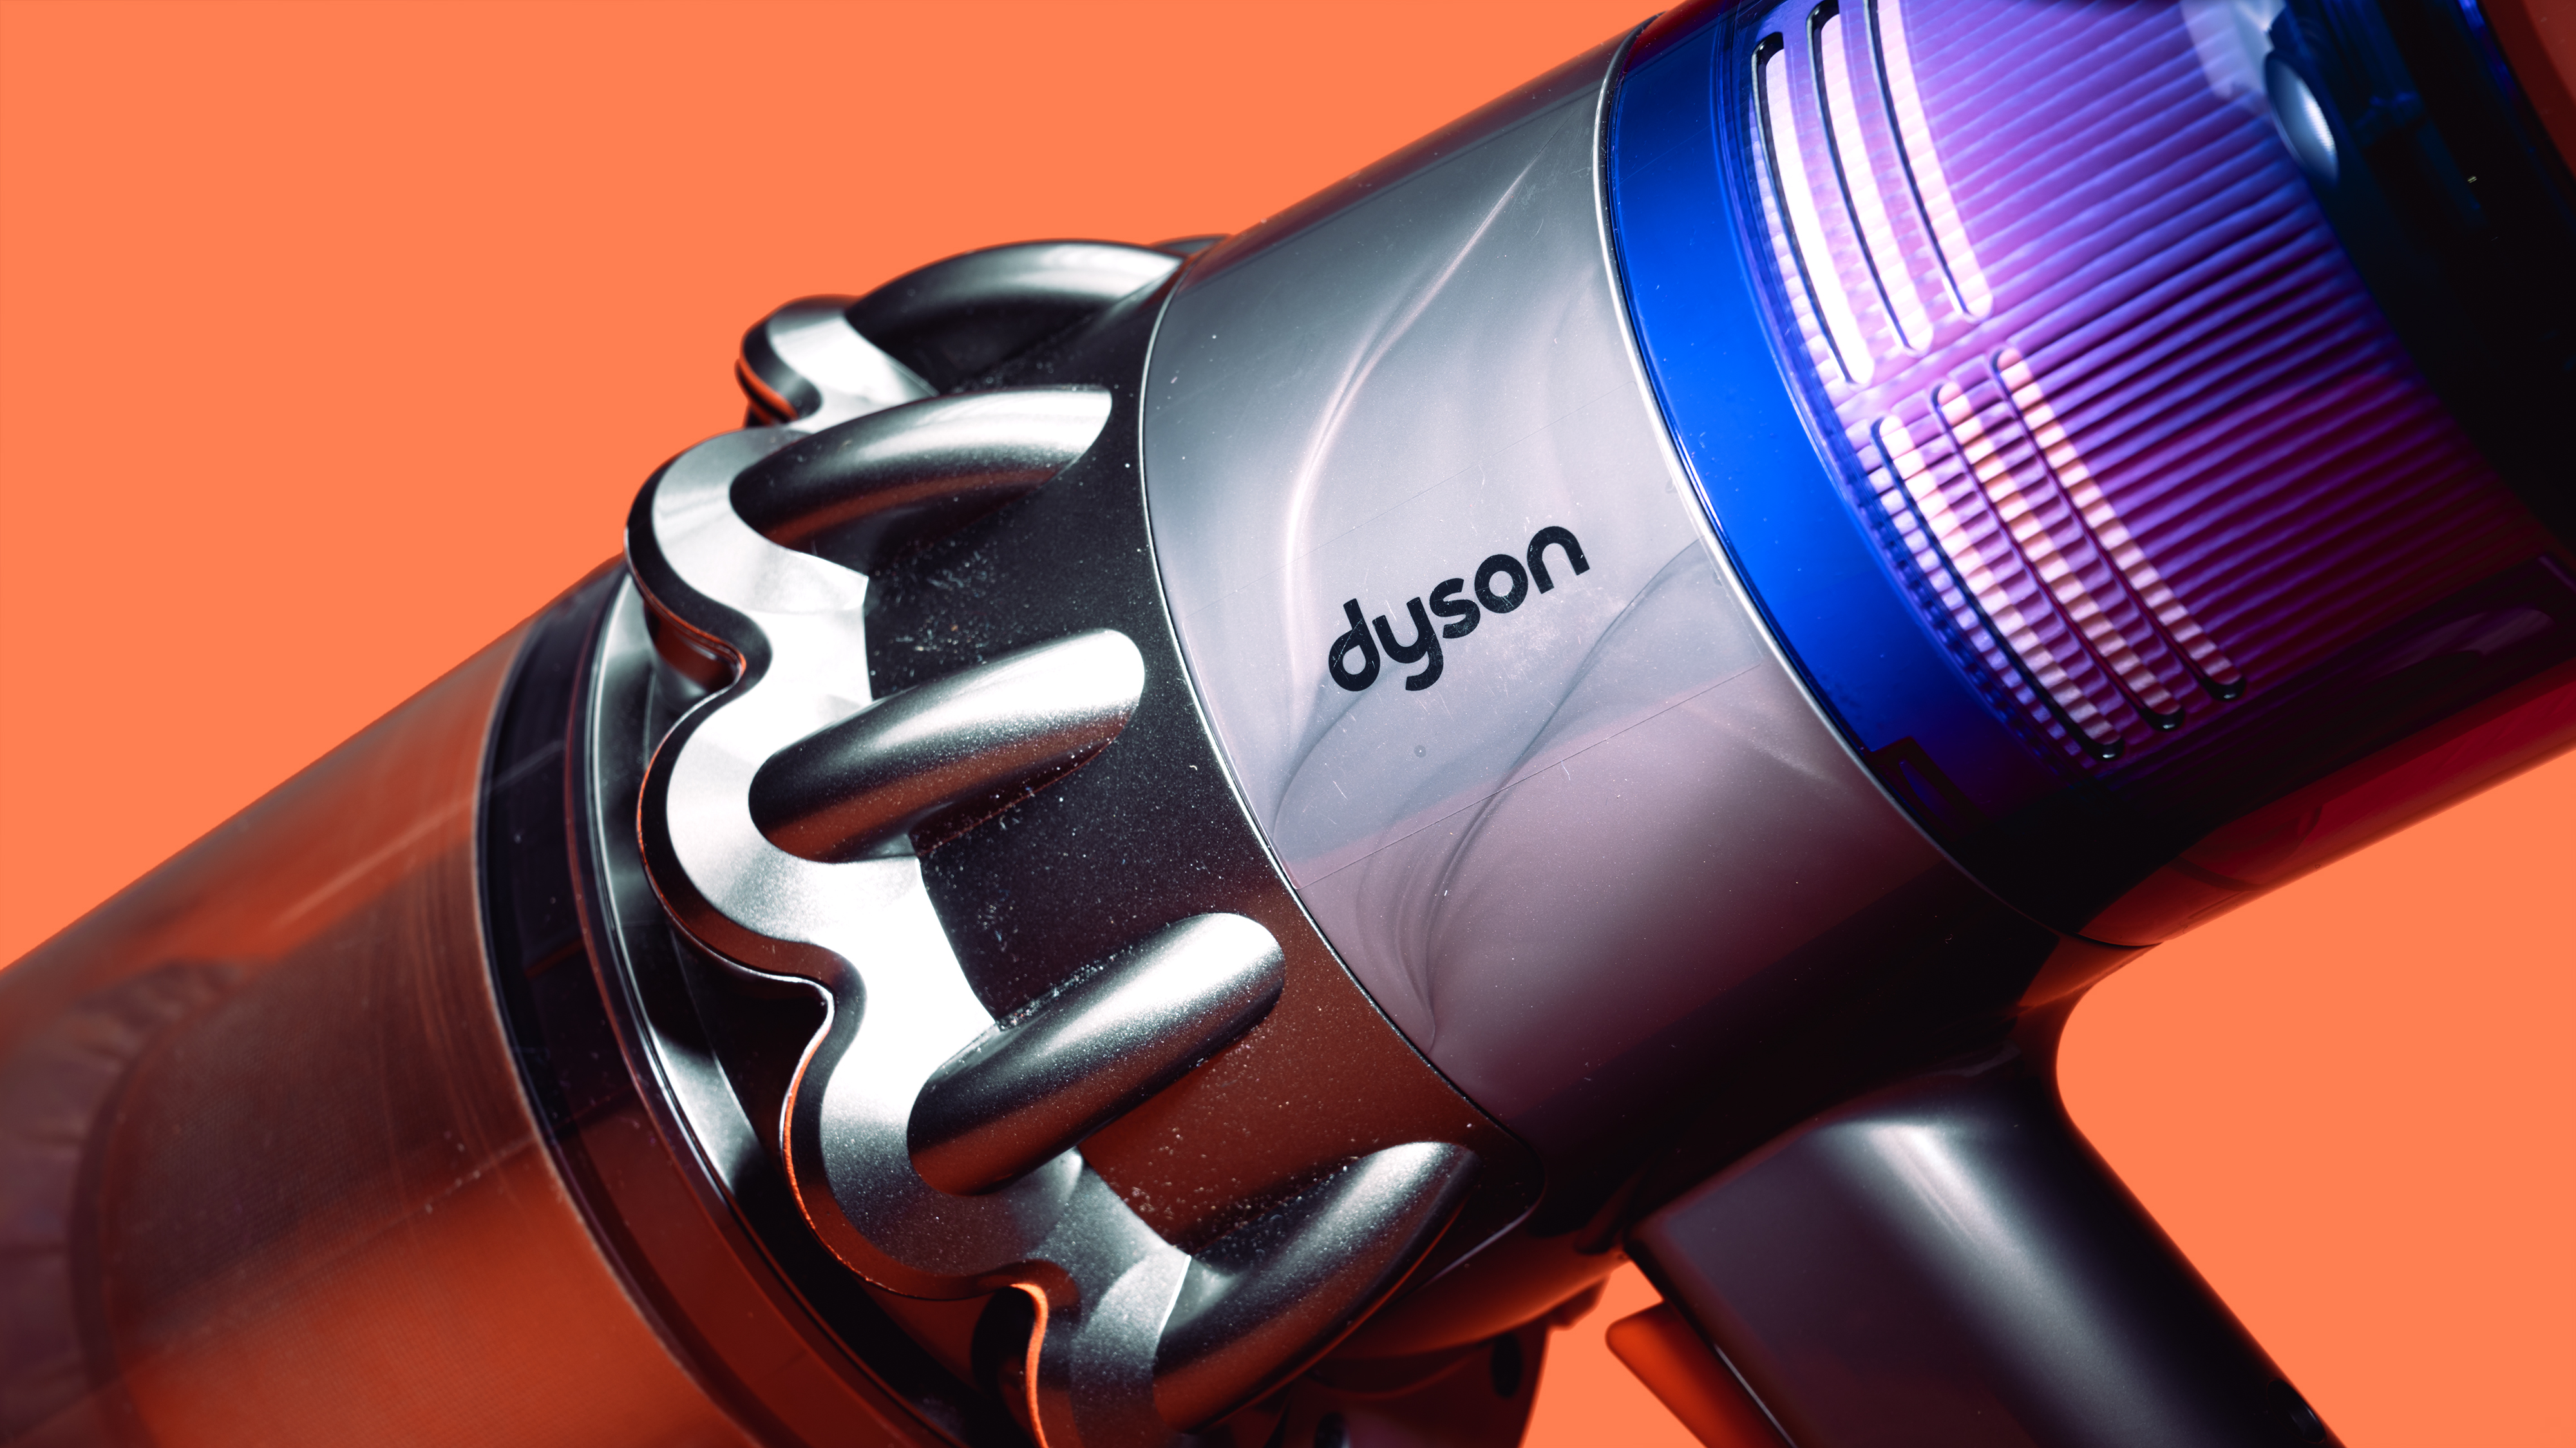 The Dyson V11 Torque Drive is a good buy for those who demand excellence.